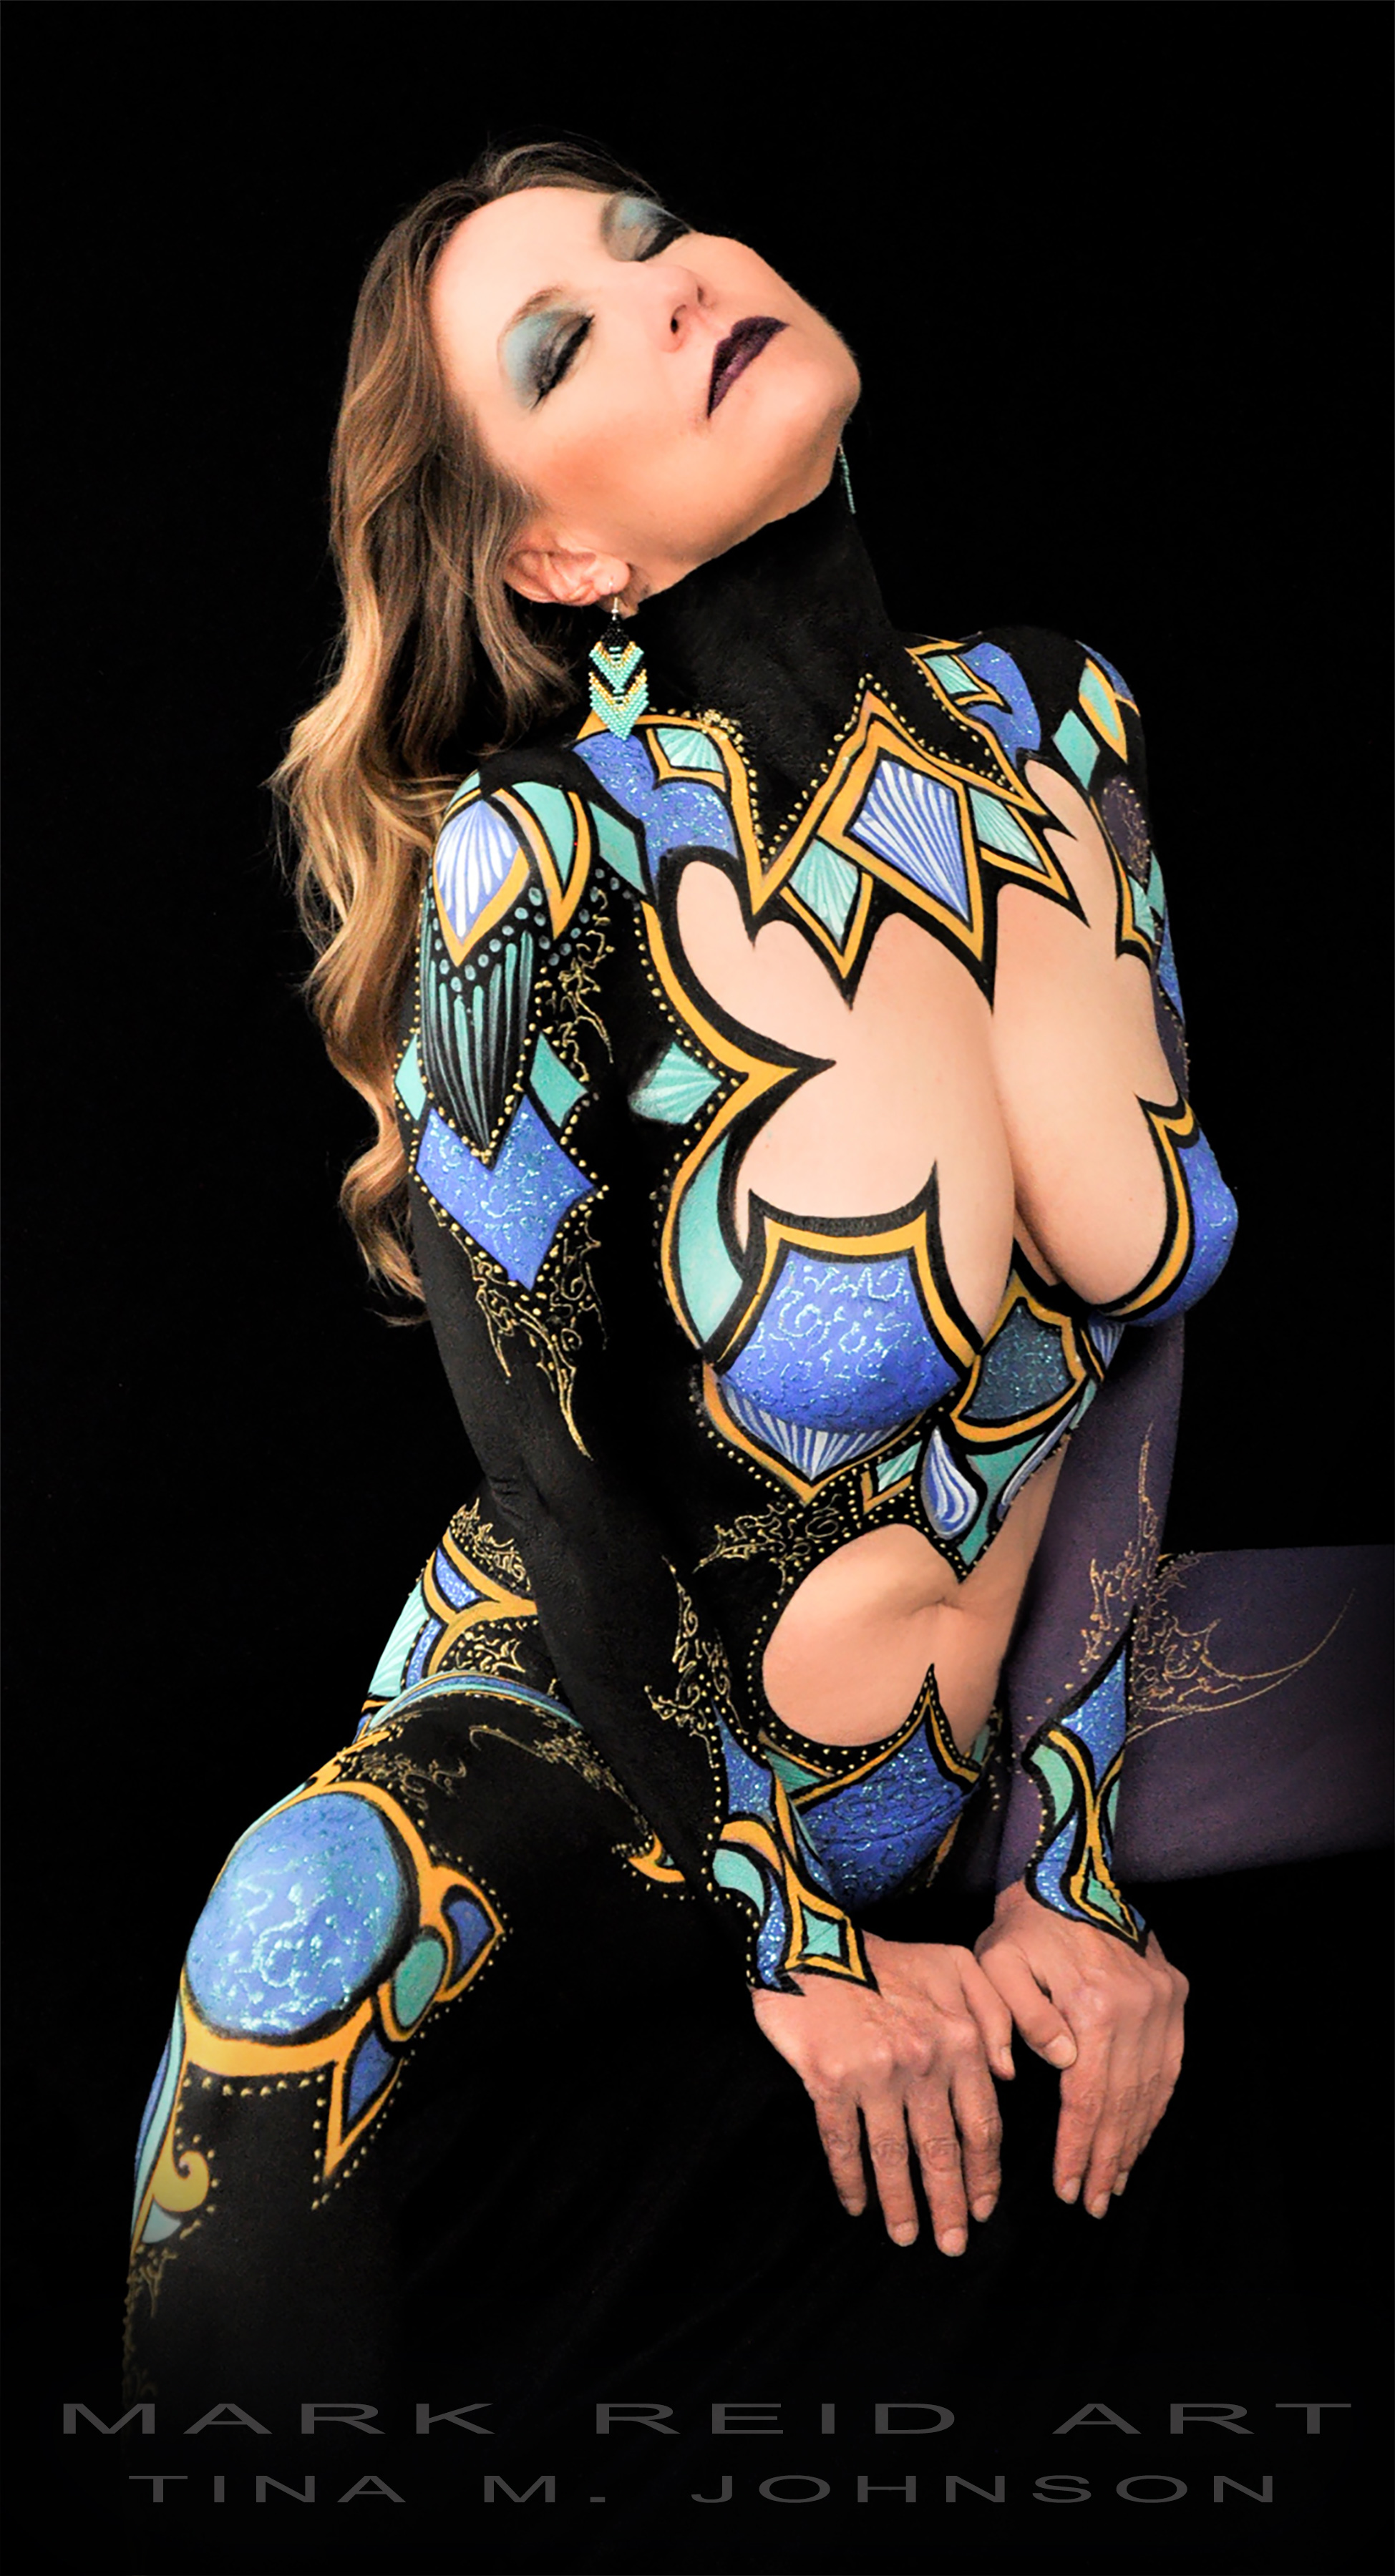 Frontal view of a honey blonde haired woman in full body paint that is brightly colored with combinations of aqua, blue, black and gold paint.  Her eyes are closed and her hands on the front of the stool with her head tilted back.